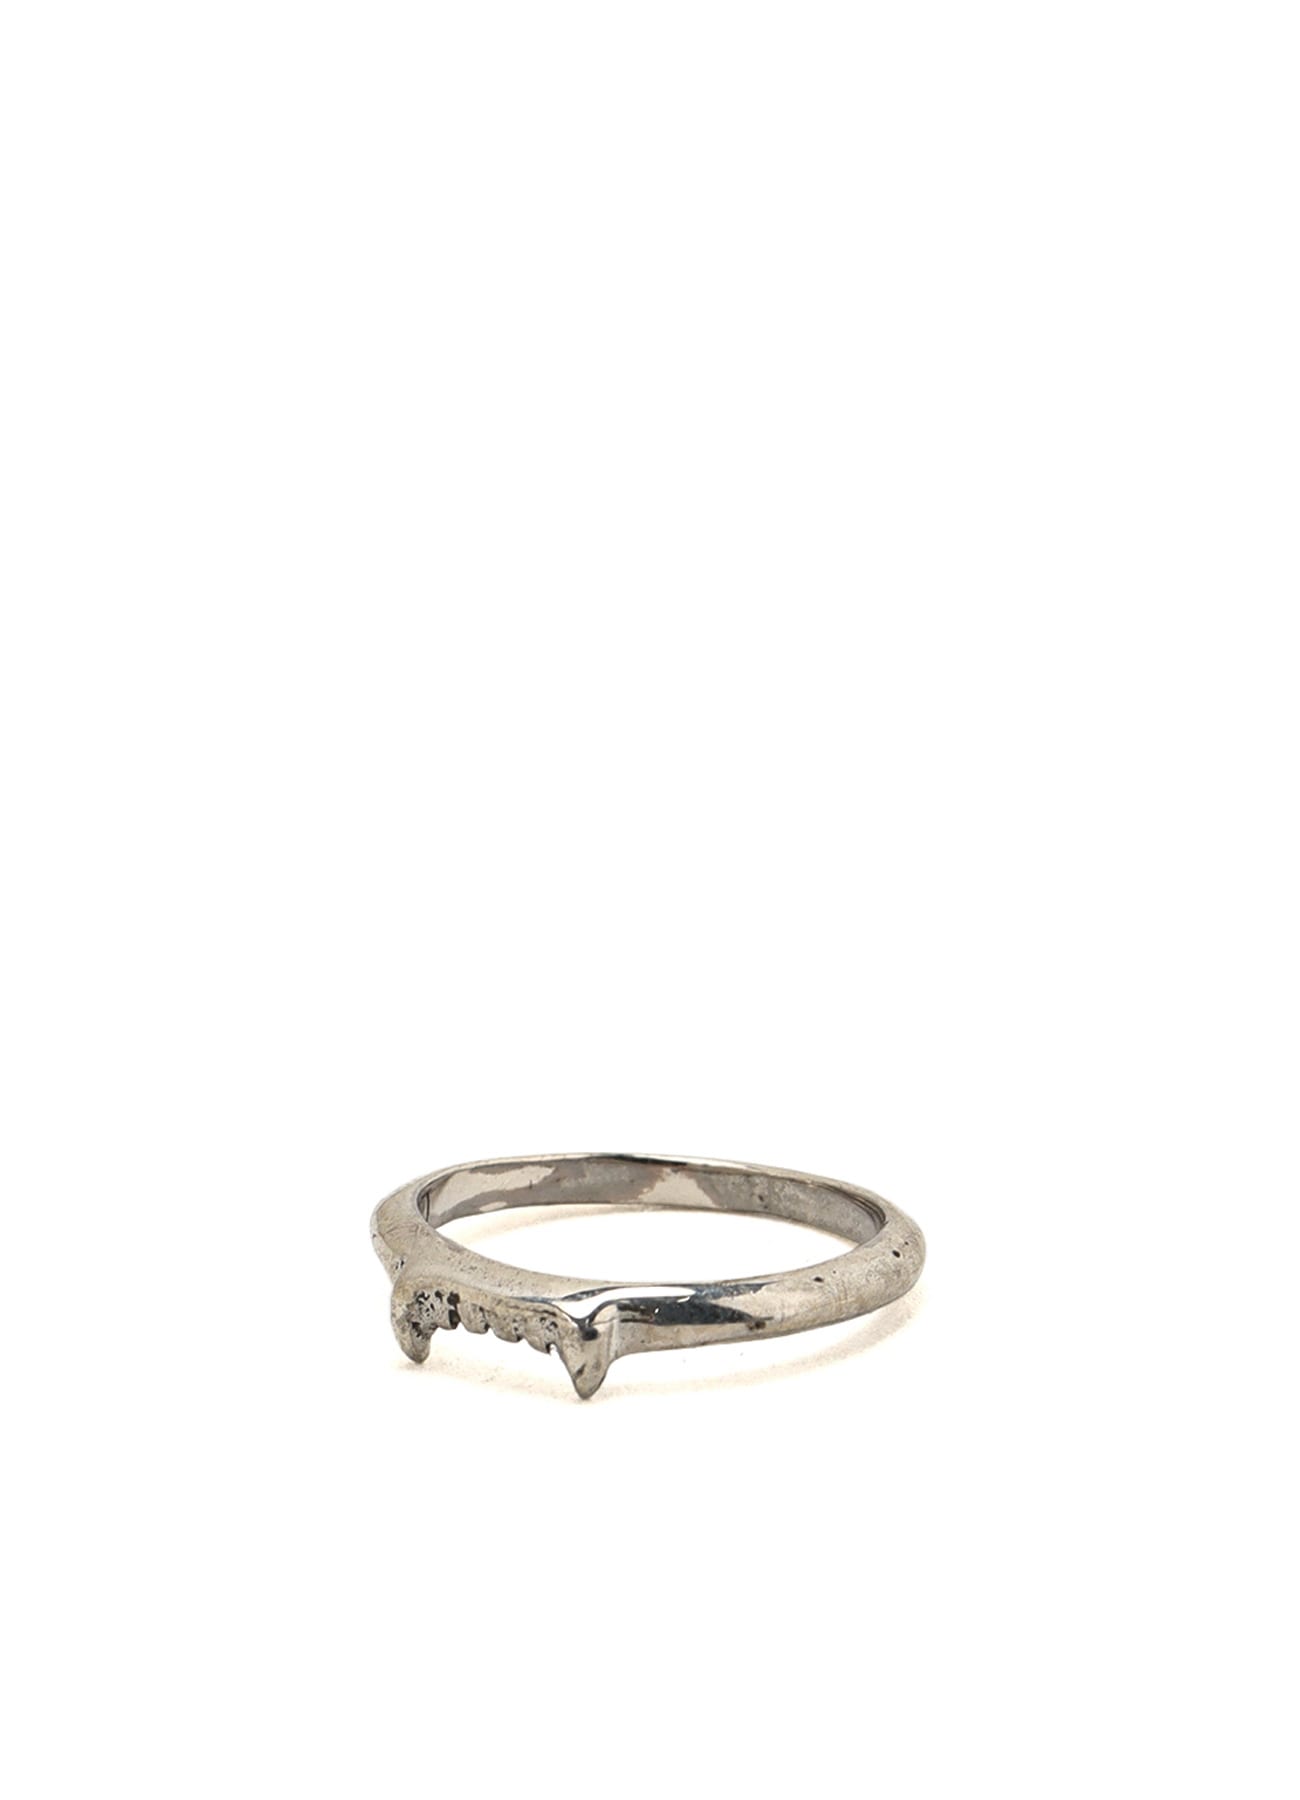 SILVER925 CAT TOOTH RING